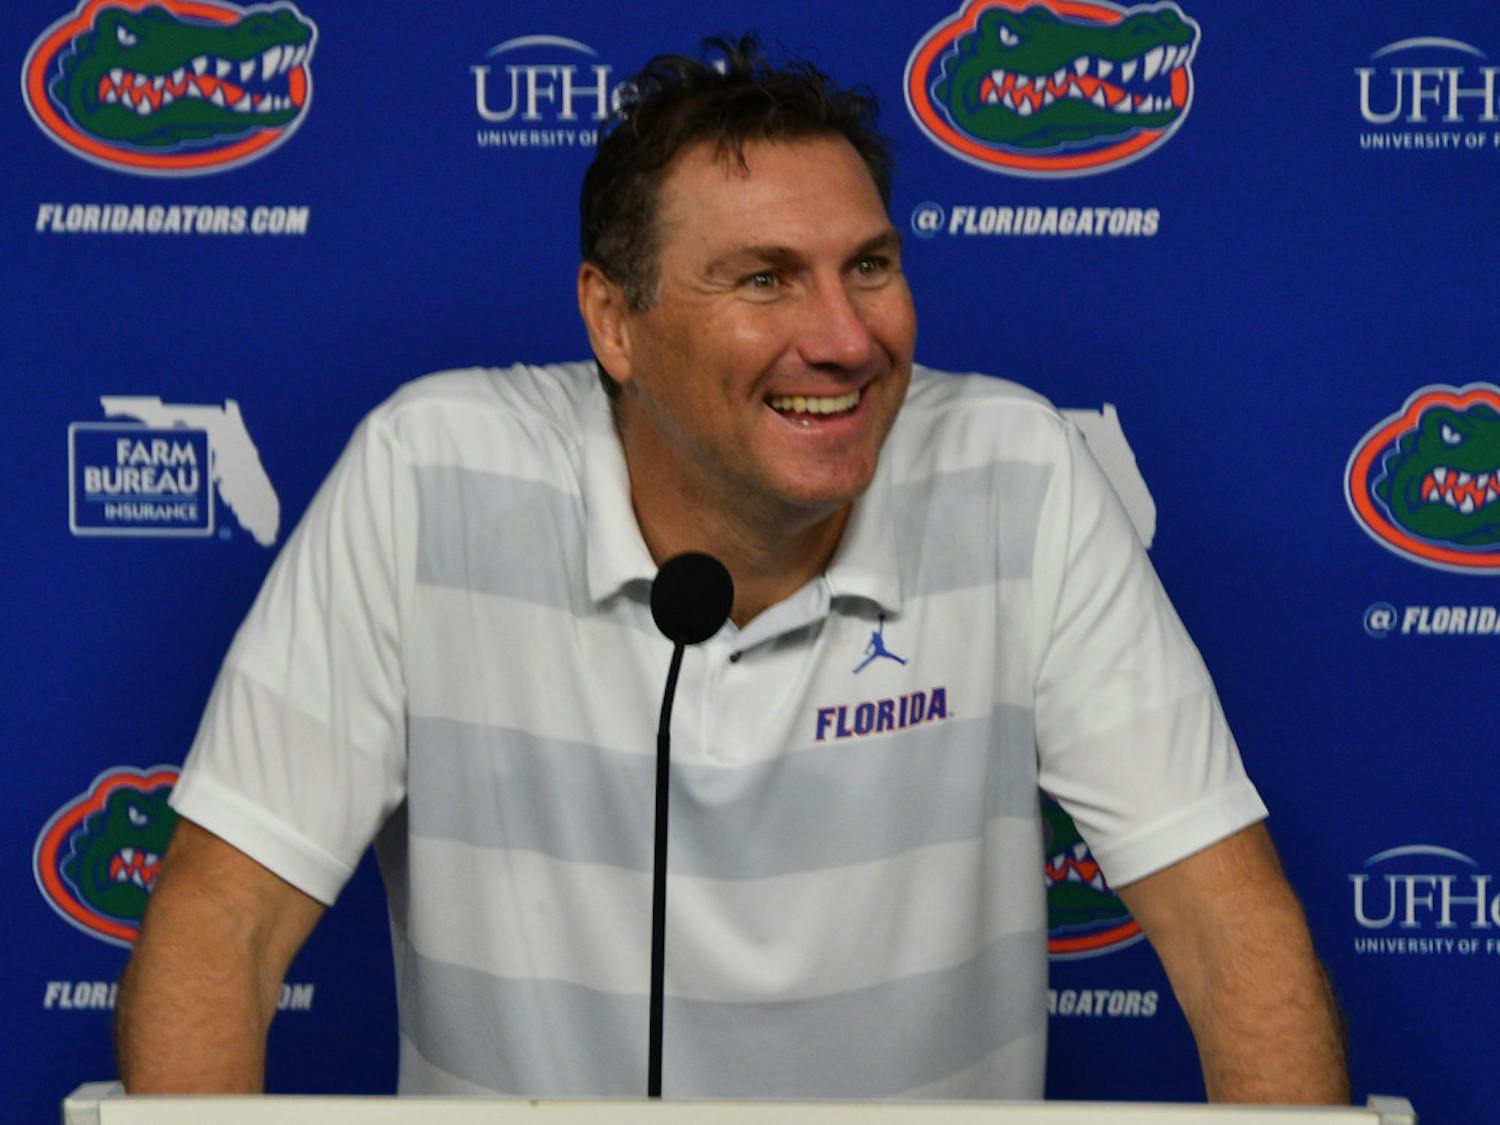 In his first season as UF head coach, Dan Mullen led the Gators (9-3) to the Chick-fil-a Peach Bowl, where they will face Michigan.  